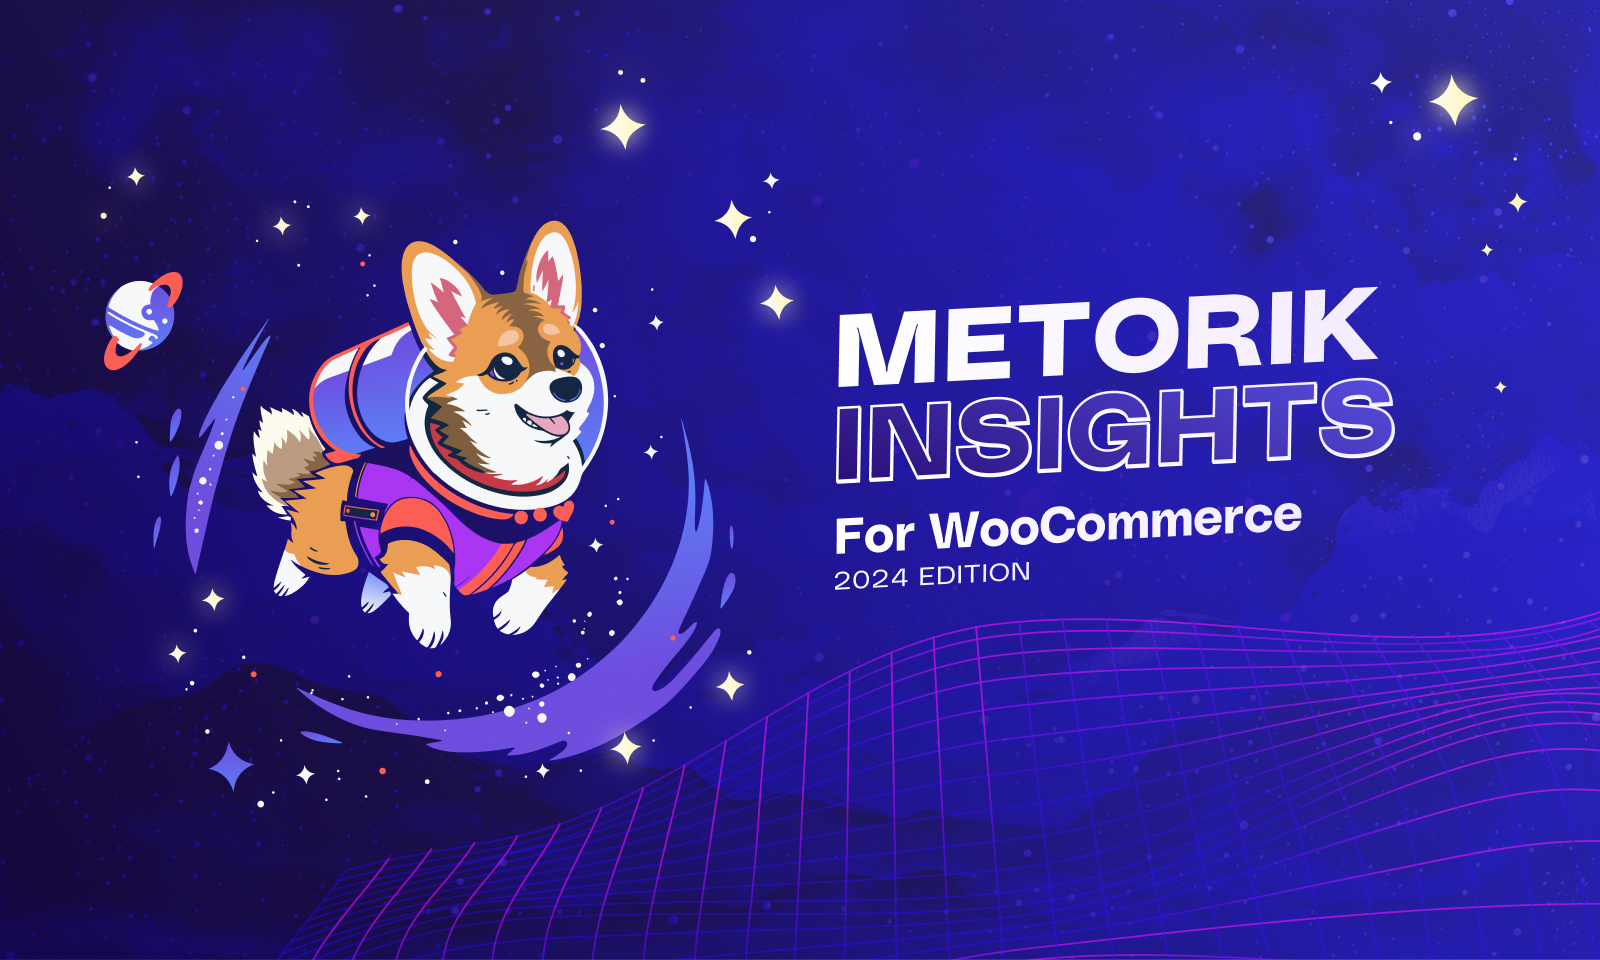 Introducing Metorik Insights for WooCommerce, 2024 Edition